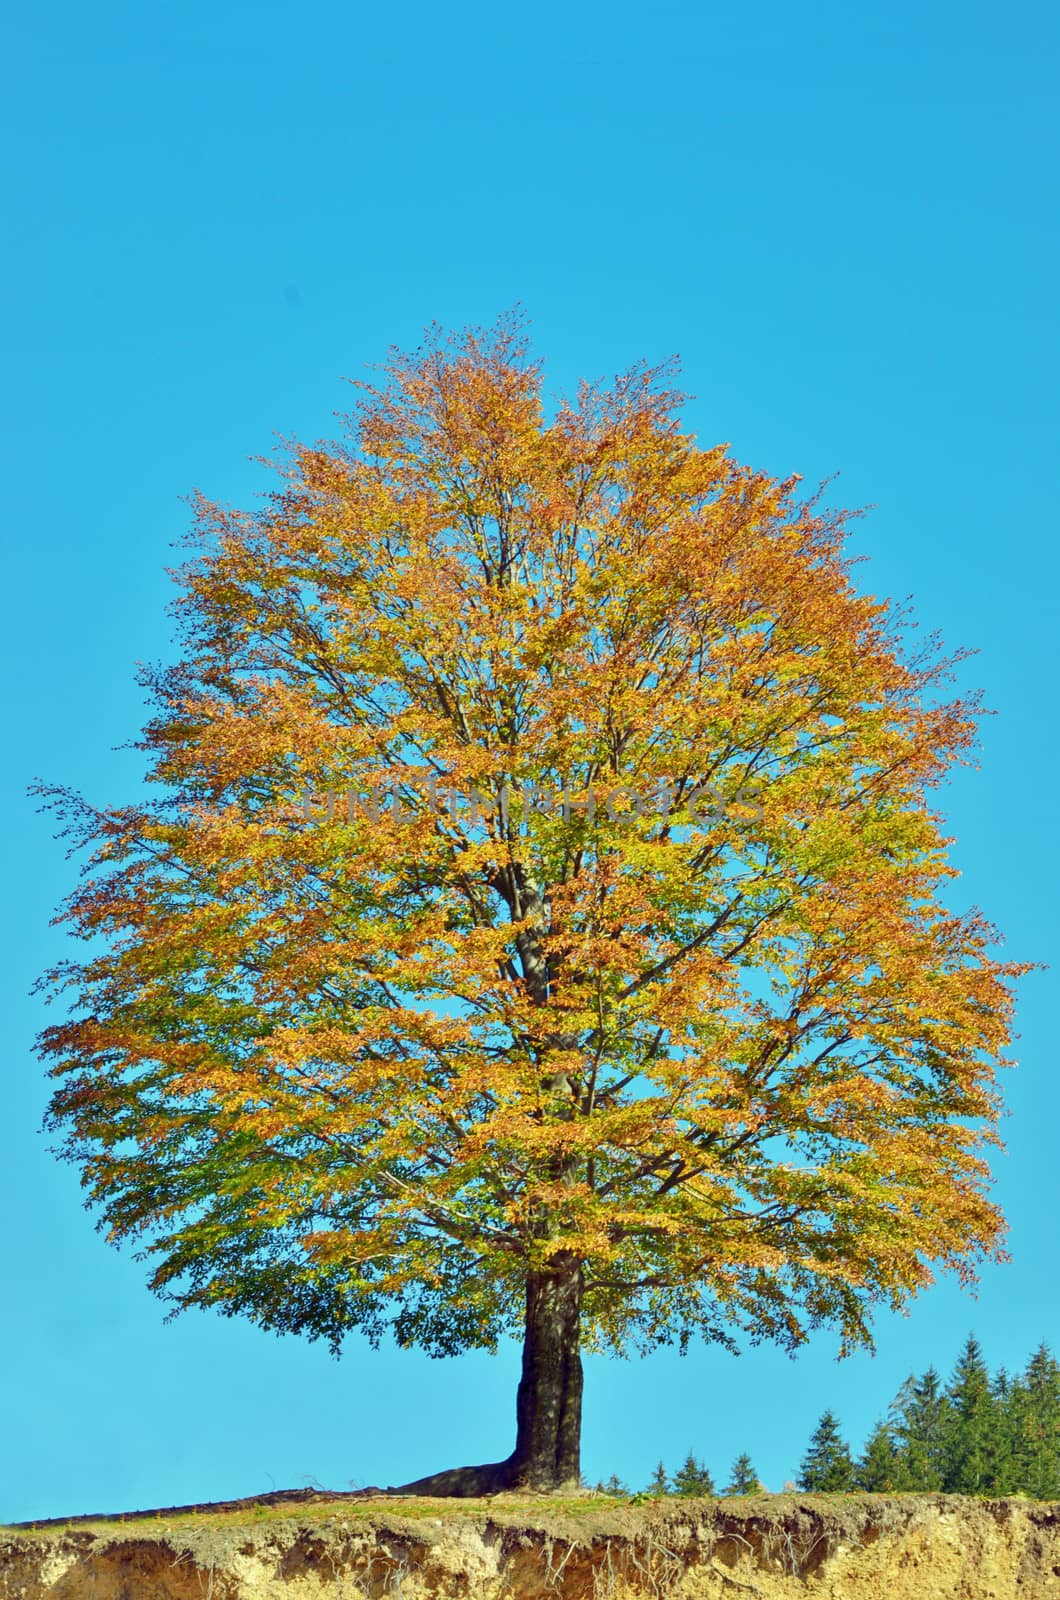 autumn oak tree with yellow leaves on a blue sky background